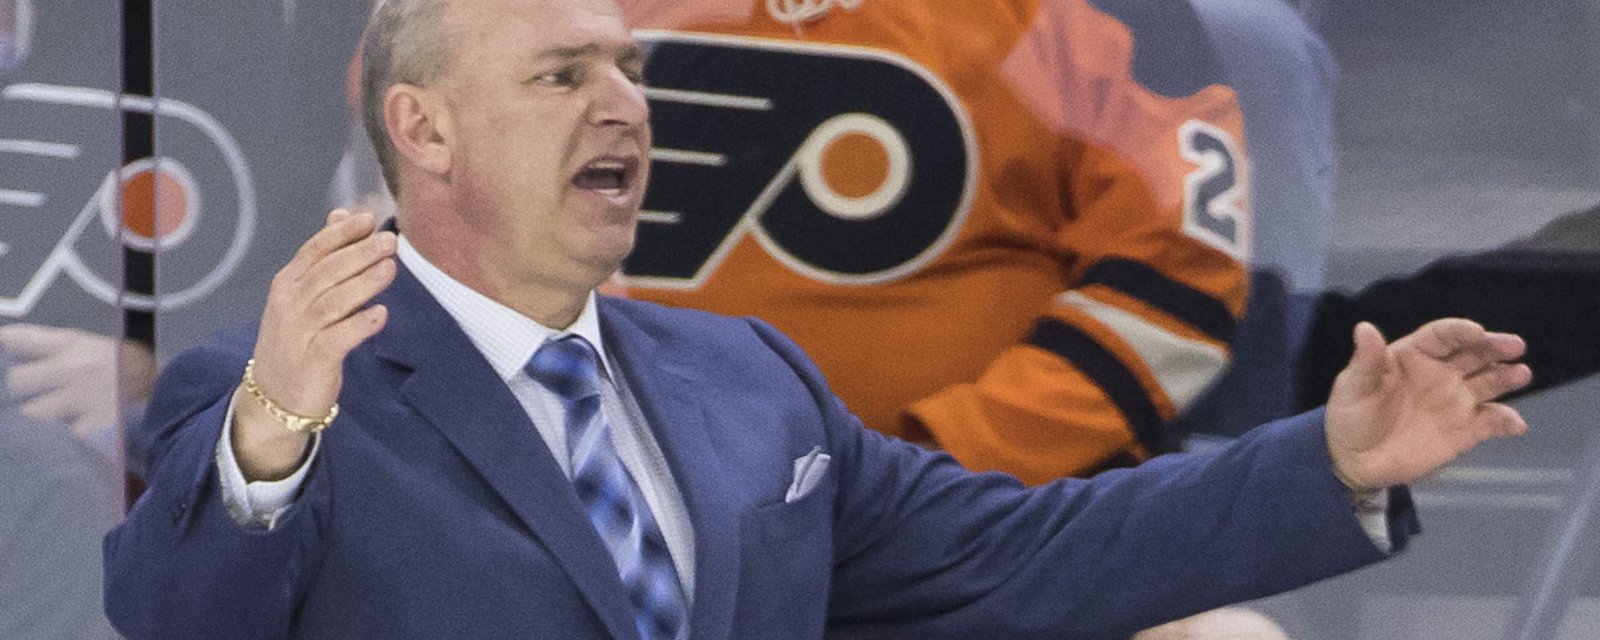 NHL insider suggests Therrien may have lied about former team!